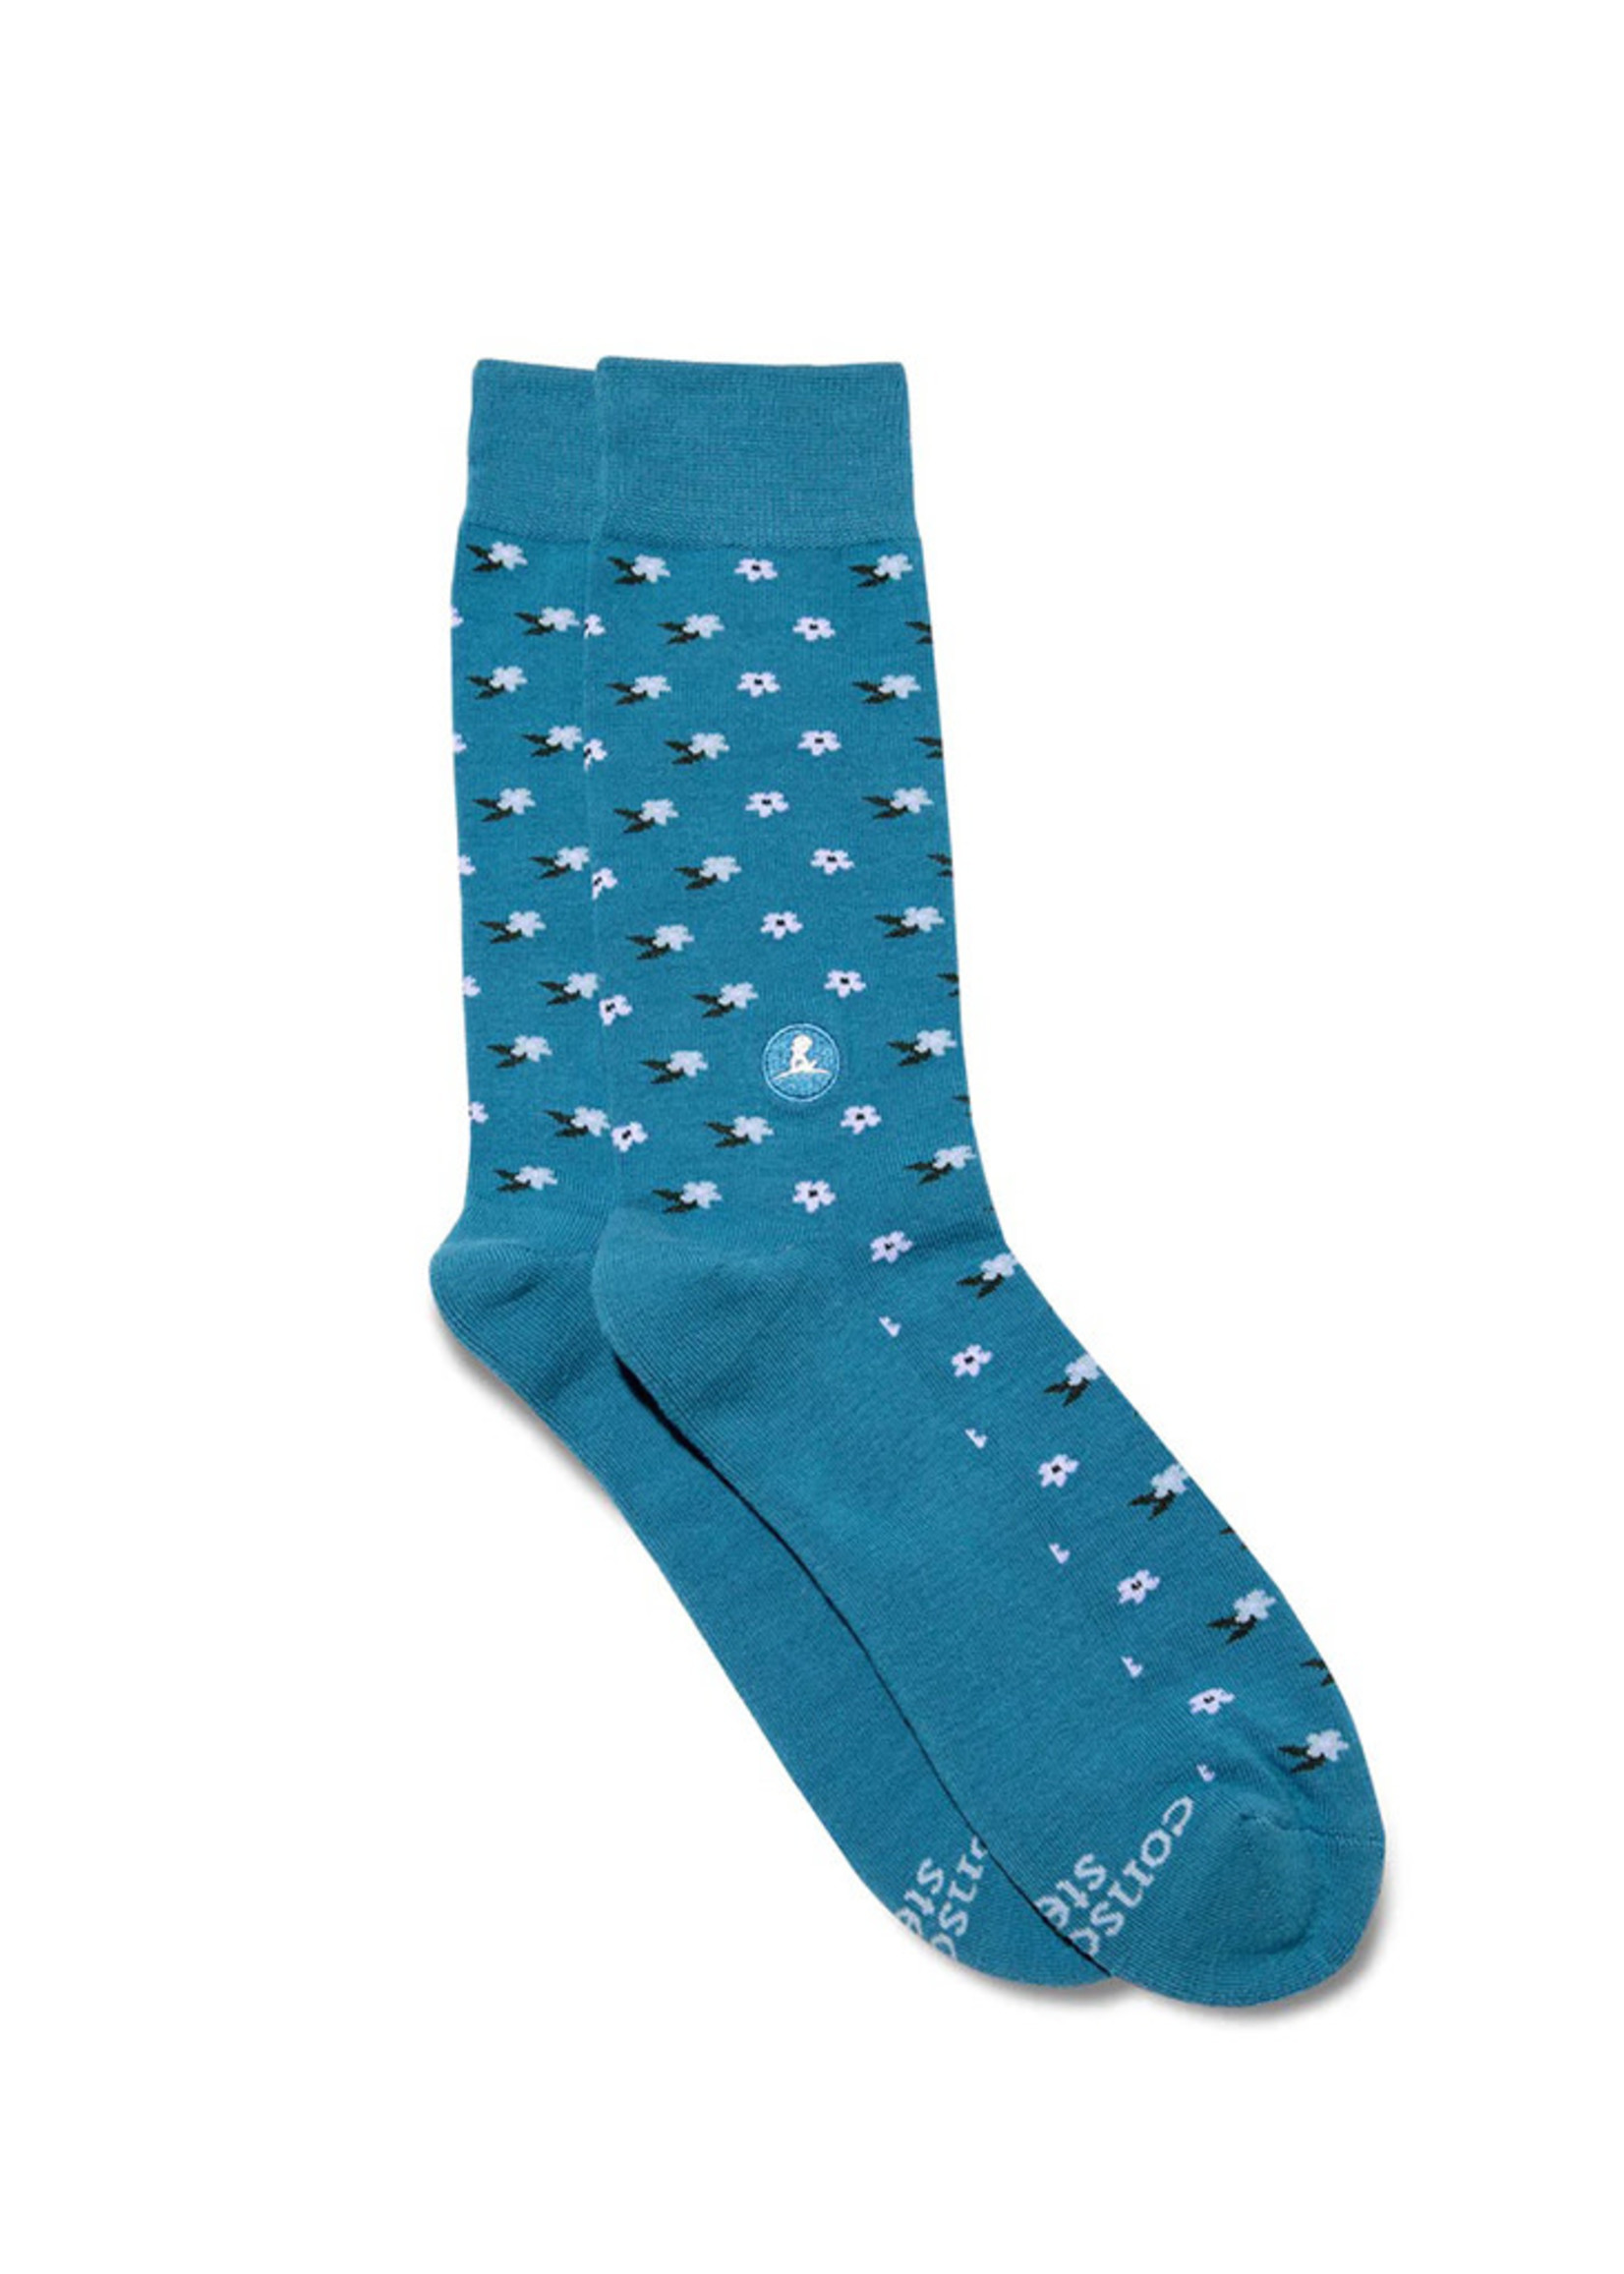 Conscious Step Men's Flower Socks That Find a Cure